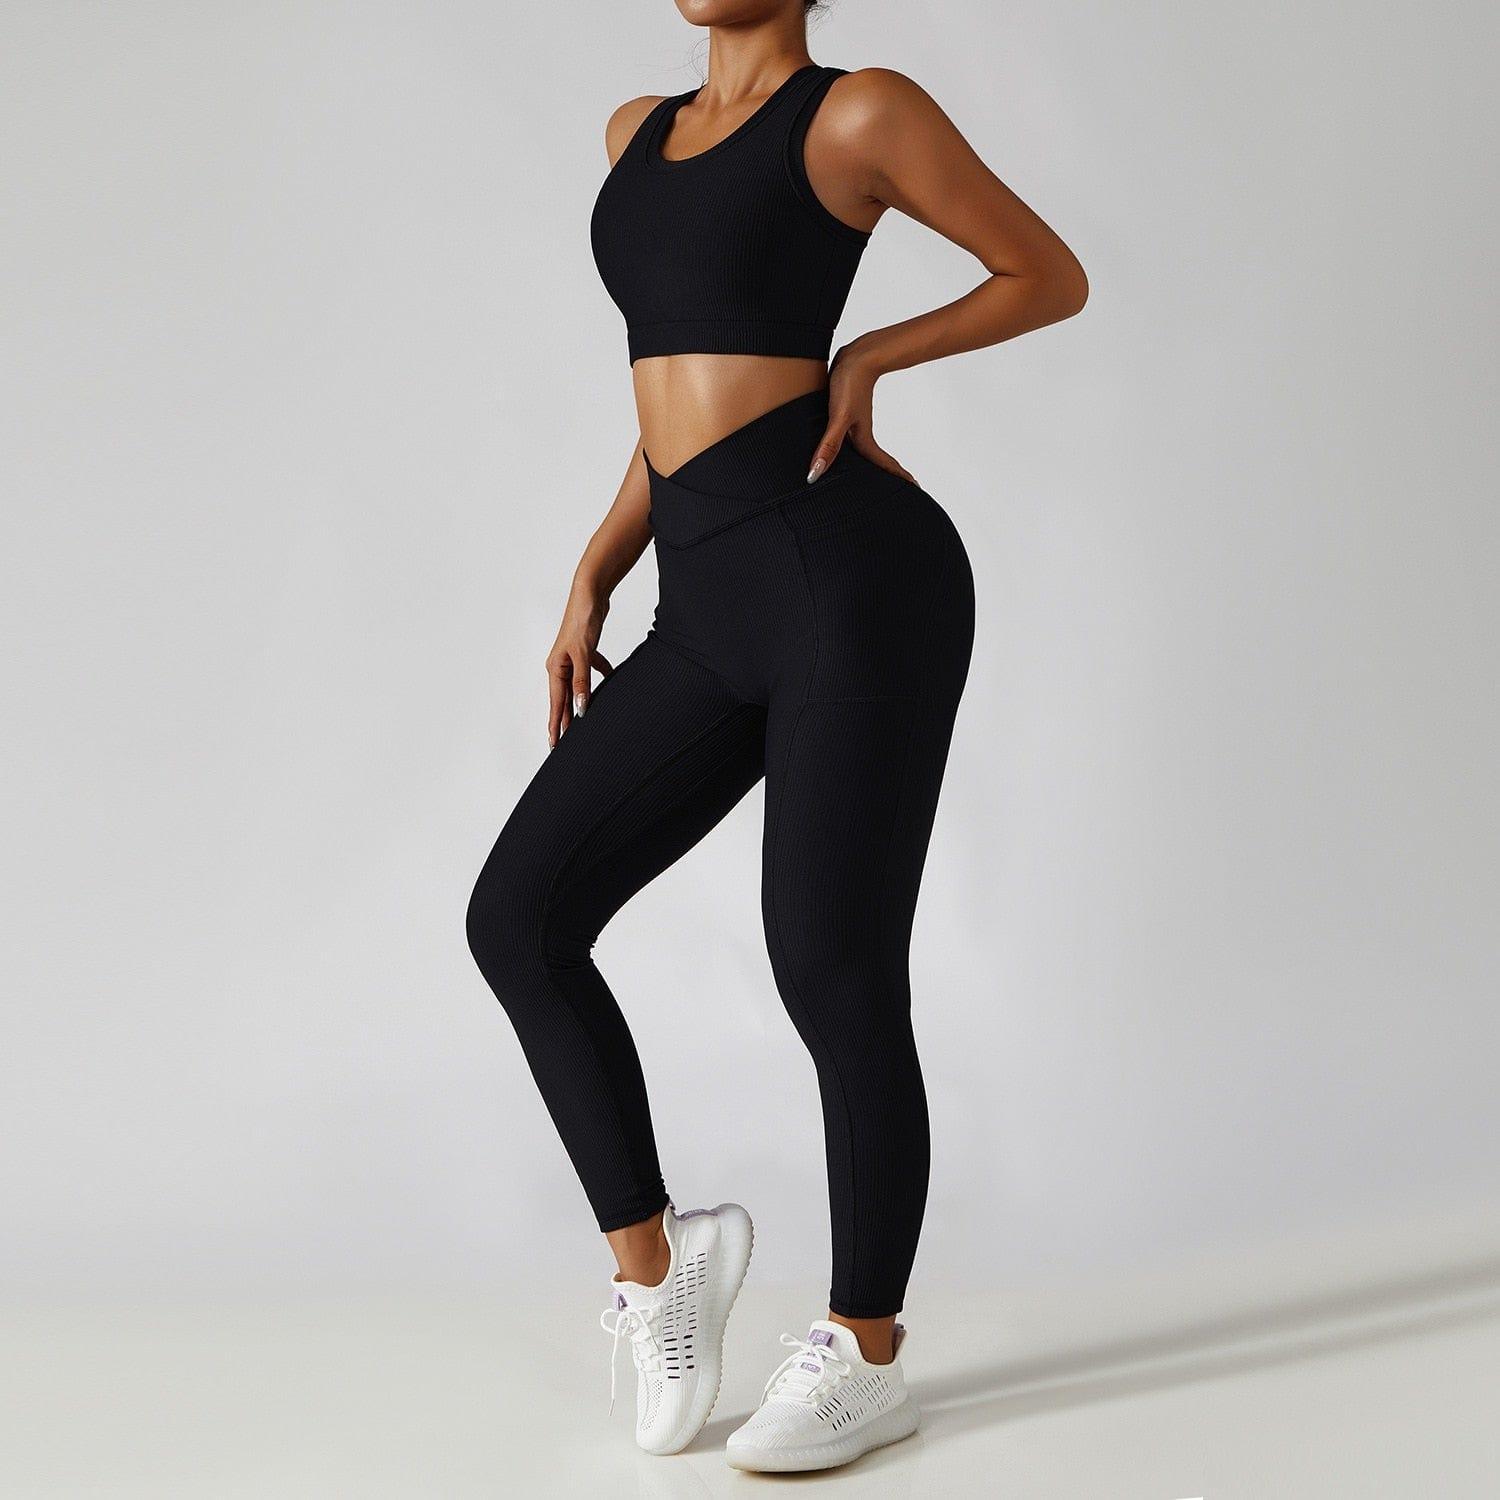 Shop 0 Black suit-4 / S / China 2 Pieces Seamless Women Tracksuit  Yoga Set Running Workout Sportswear Gym Clothes Fitness Bra High Waist Leggings Sports Suit Mademoiselle Home Decor